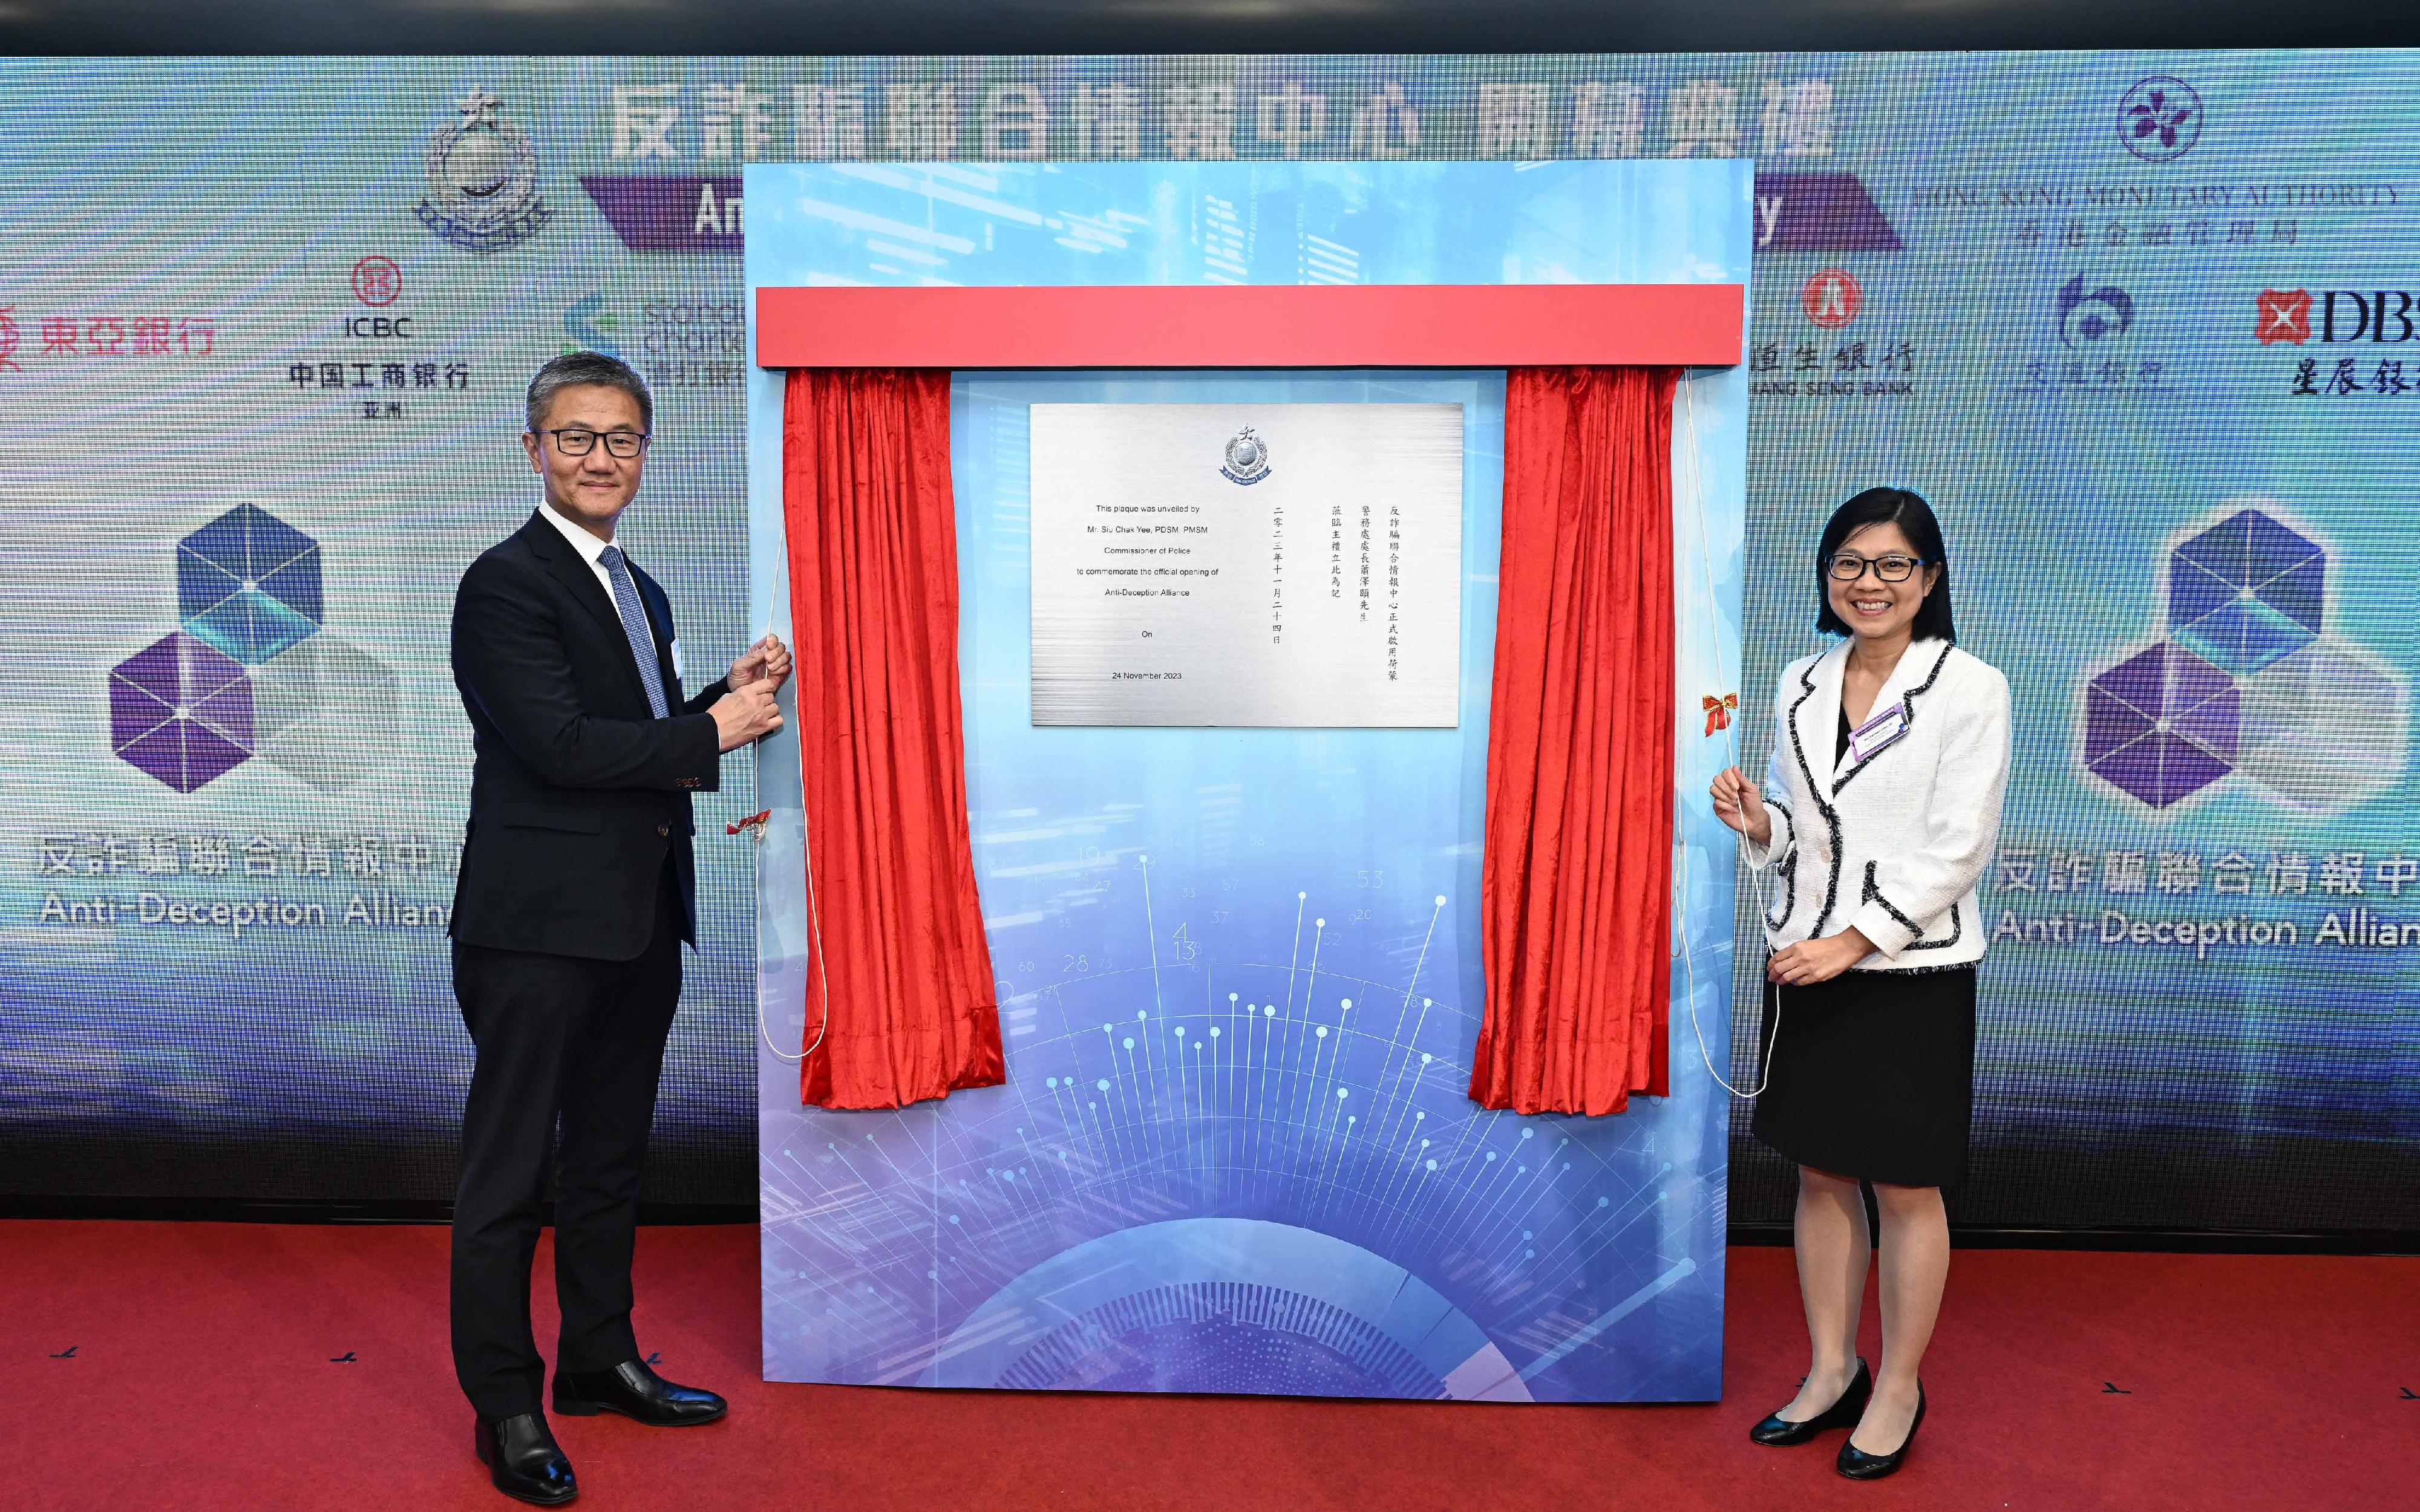 The Hong Kong Police Force (HKPF) held the inauguration ceremony for the Anti-Deception Alliance today (November 24). Photo shows the Commissioner of Police, Mr Siu Chak-yee (left); and the Executive Director (Enforcement and AML) of the Hong Kong Monetary Authority, Ms Carmen Chu (right) unveiled the plague at the ceremony.